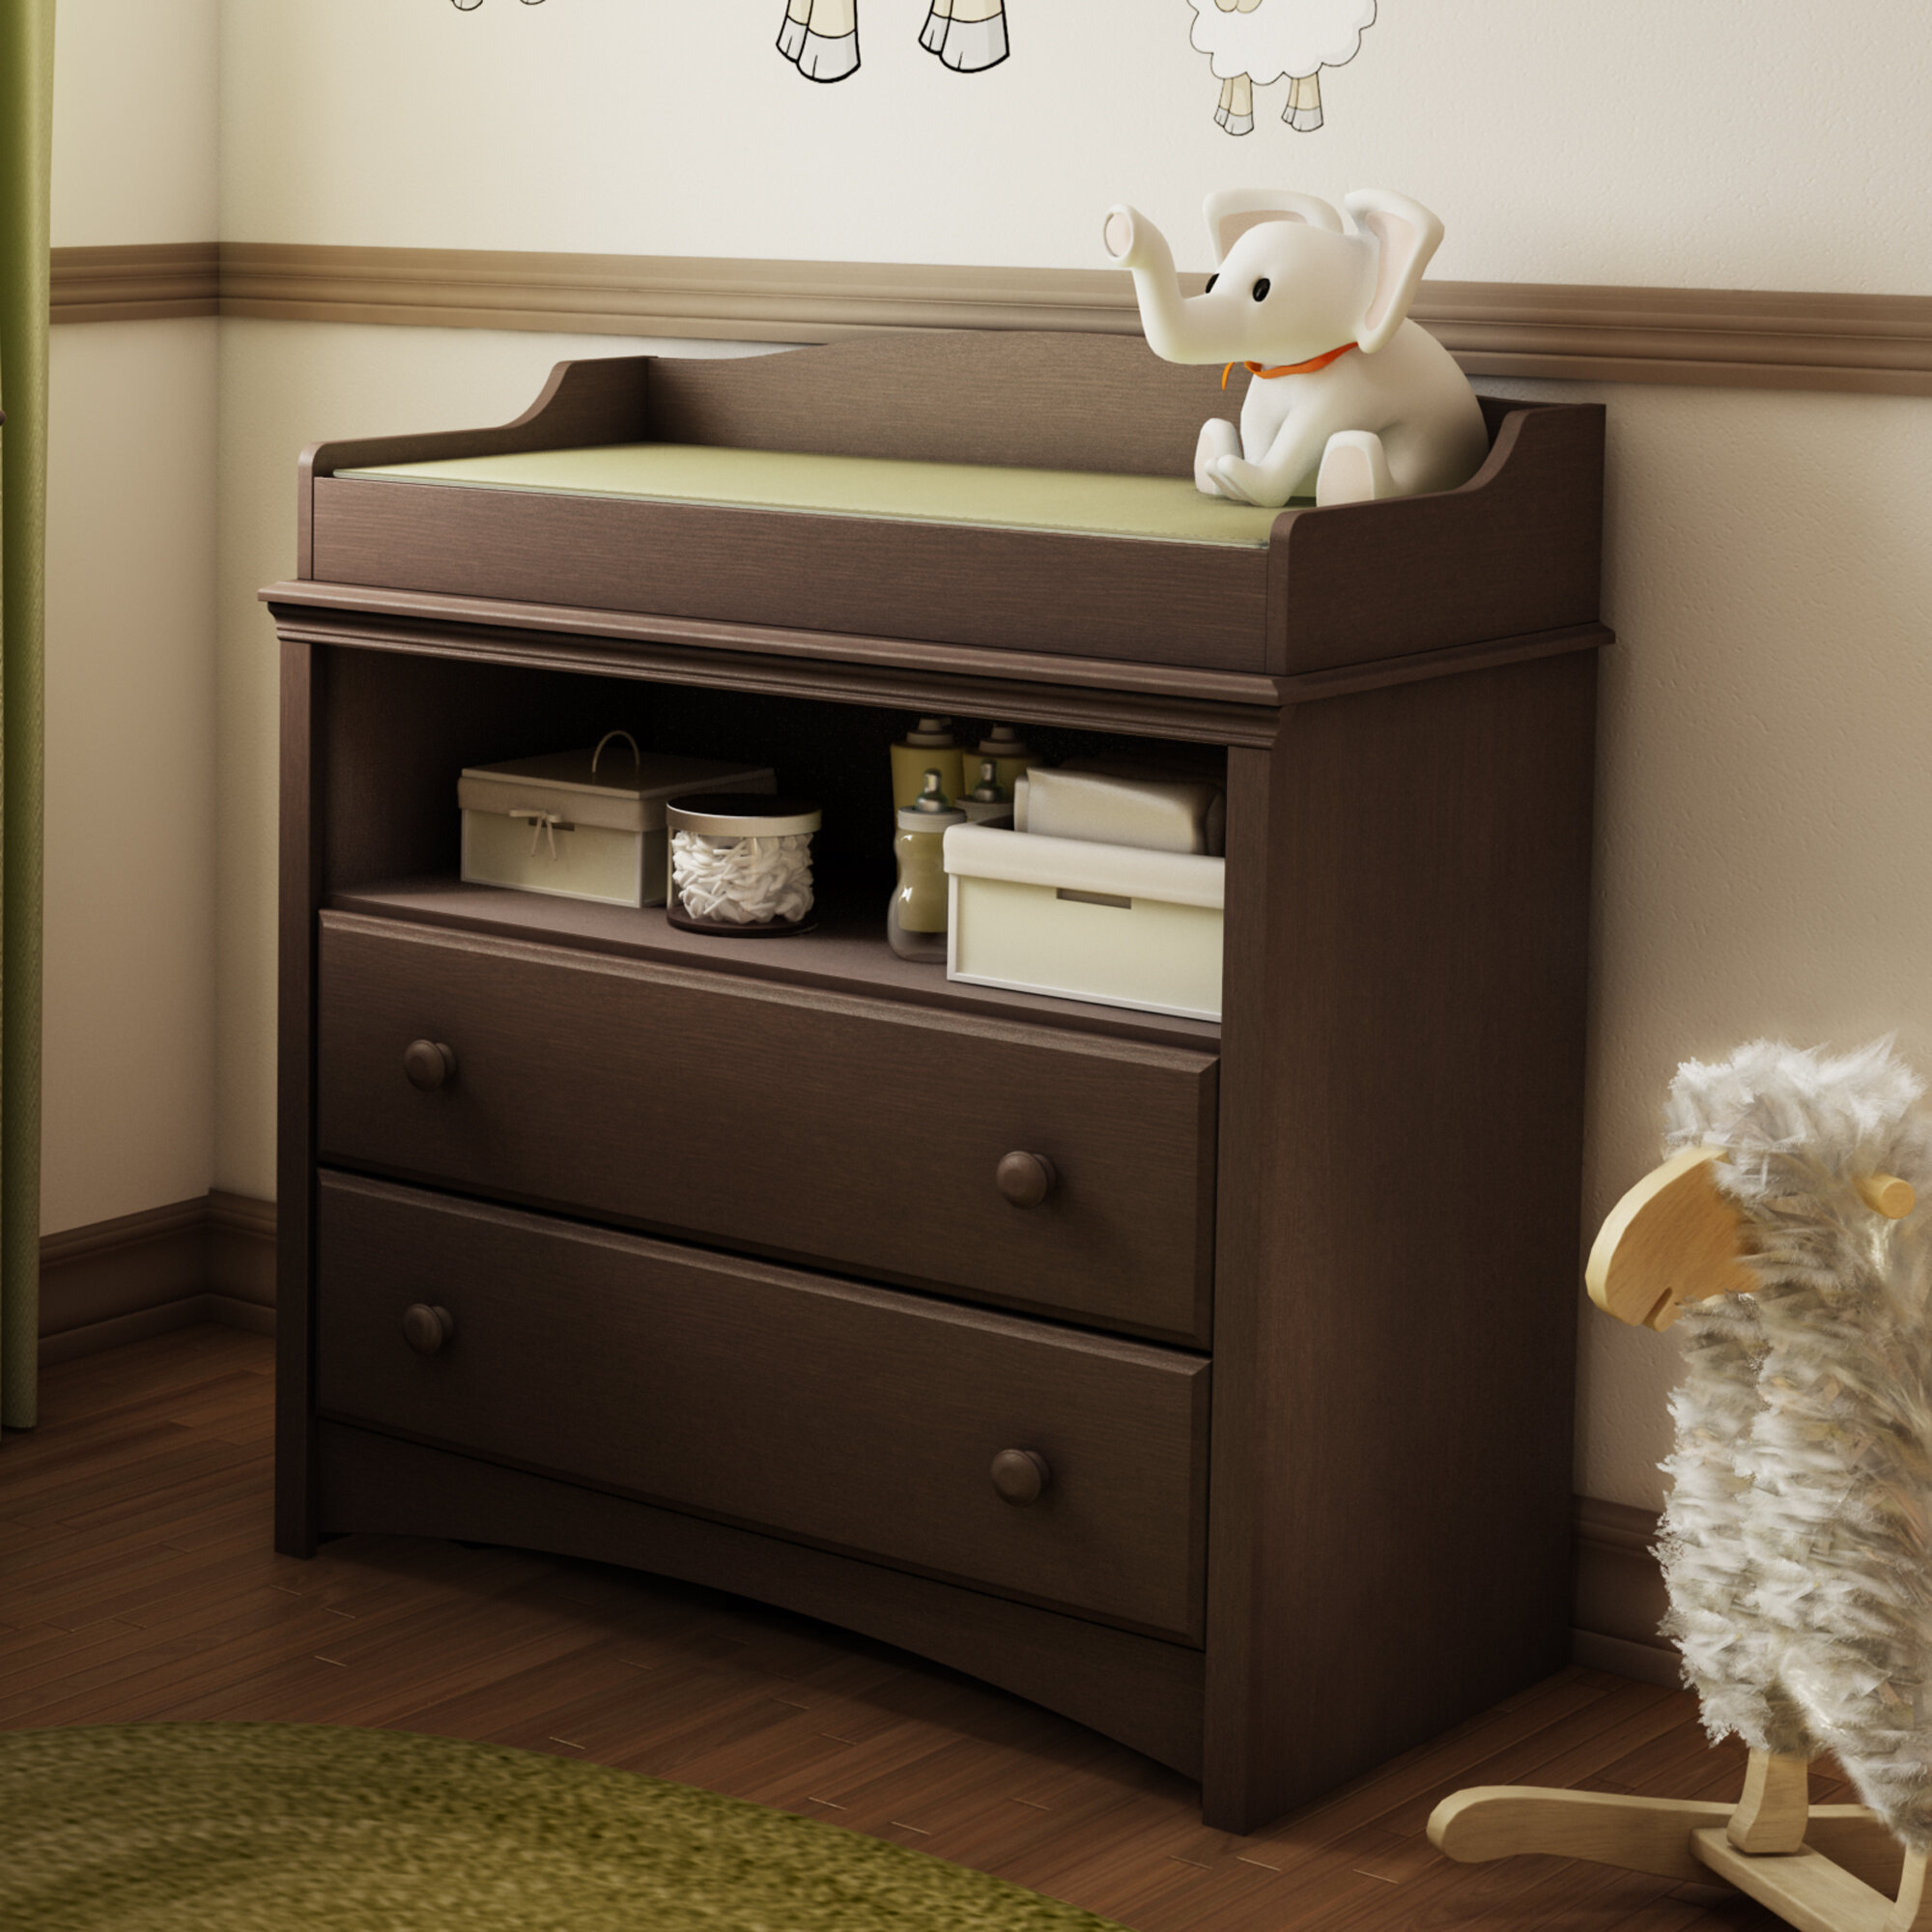 Espresso South Shore Angel Changing Table and Dresser with Drawers 